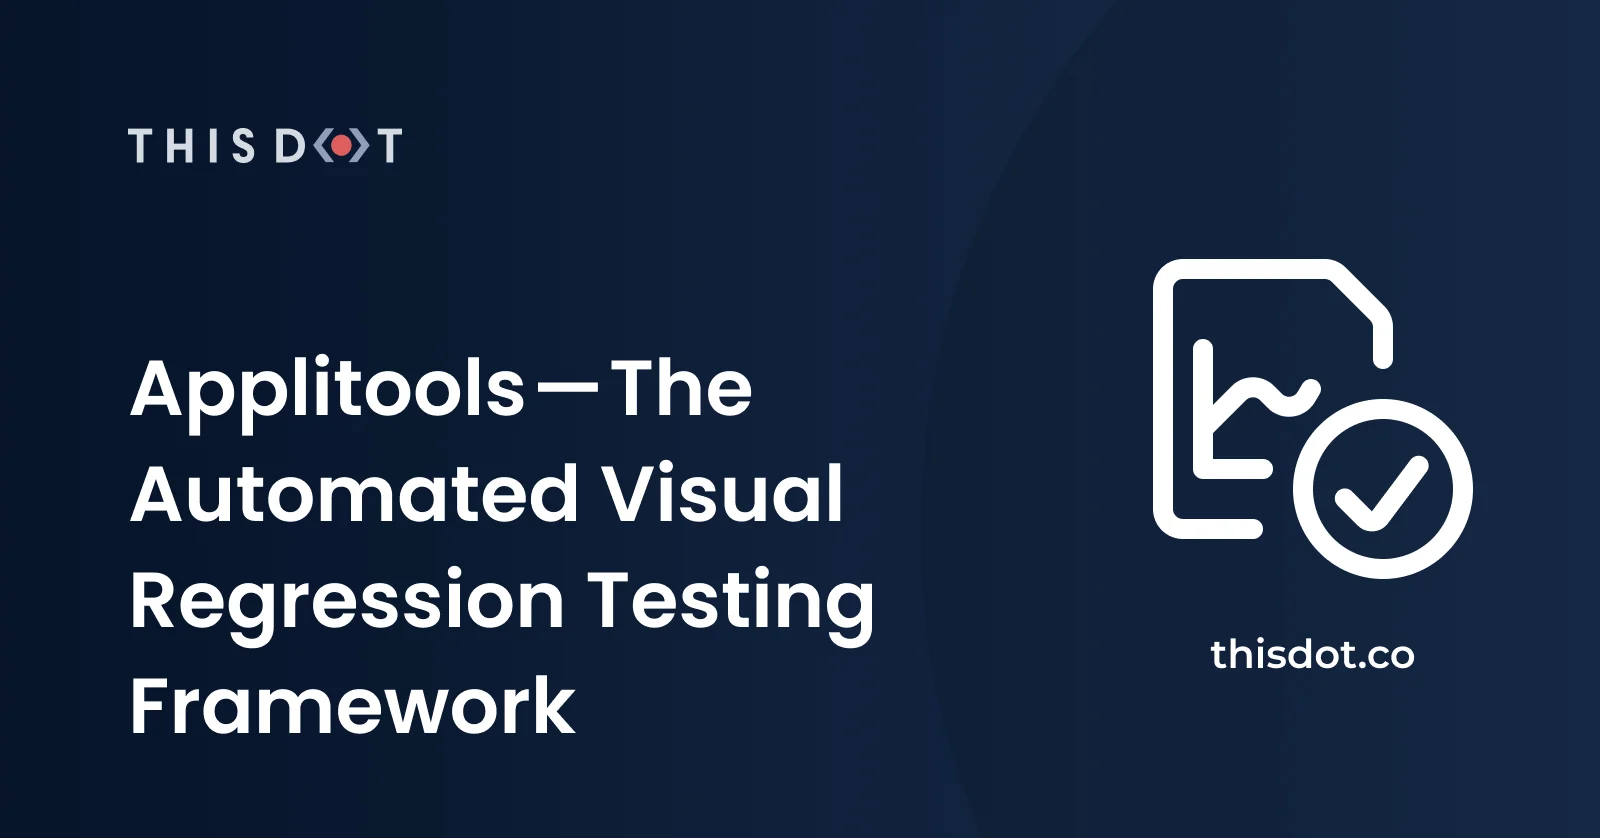 Applitools — The Automated Visual Regression Testing Framework cover image